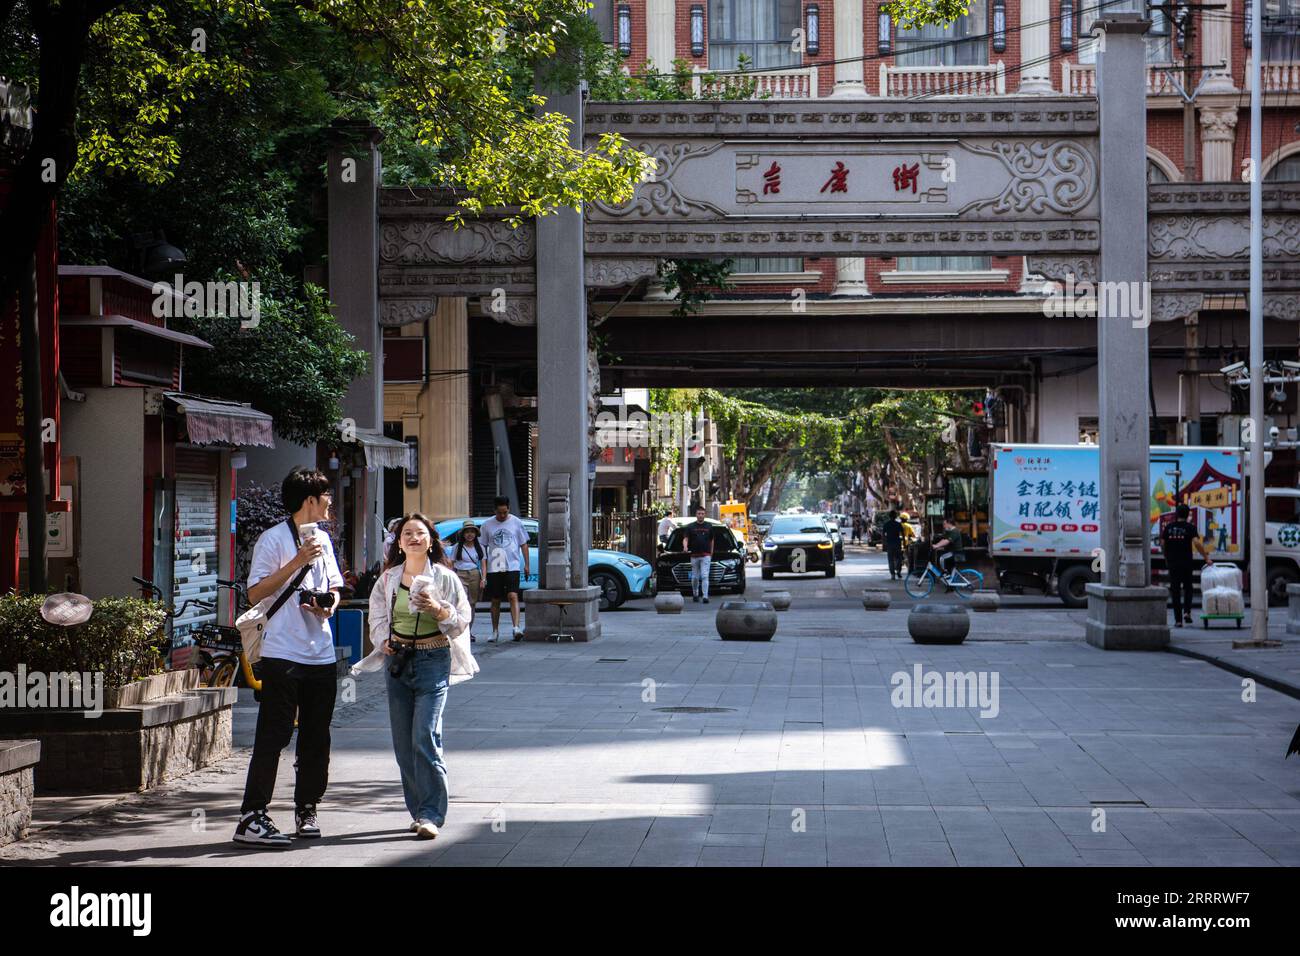 230615 -- WUHAN, June 15, 2023 -- Tourists visit Jiqing Street of Hankou historical area in Wuhan, central China s Hubei Province, June 6, 2023. Covering an area of 6.02 square kilometers, the Hankou historical area in the heart of Wuhan City s old town, boasts an abundance of historical and cultural heritages. In recent years, Wuhan City has undertaken many urban renewal projects to revitalize this area s aging buildings. The historical area has seen significant changes through those efforts.  CHINA-HUBEI-WUHAN-HANKOU HISTORICAL AREACN WuxZhizun PUBLICATIONxNOTxINxCHN Stock Photo